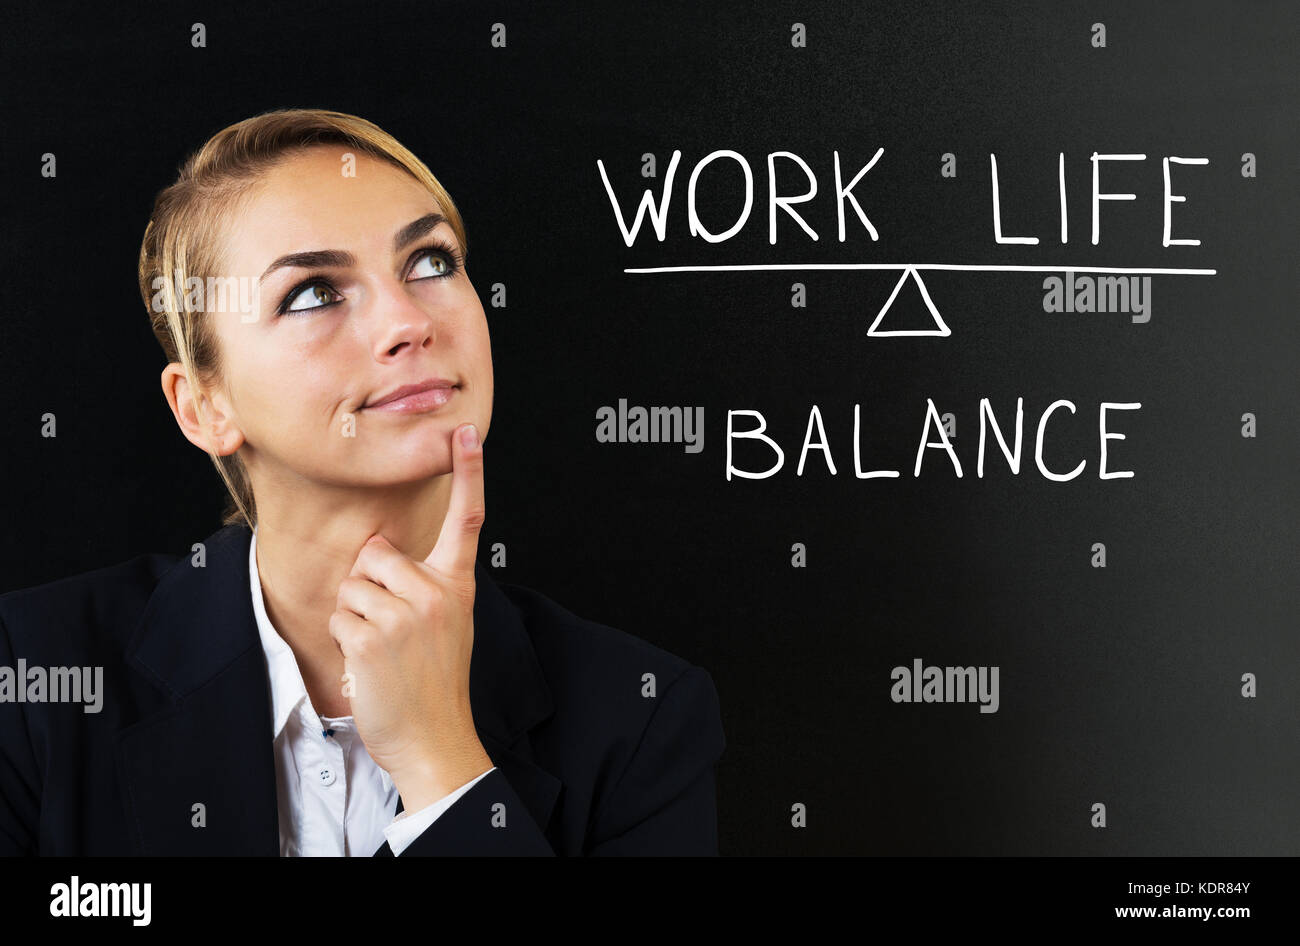 Young Businesswoman Thinking About Balancing Work Life On Black Background Stock Photo